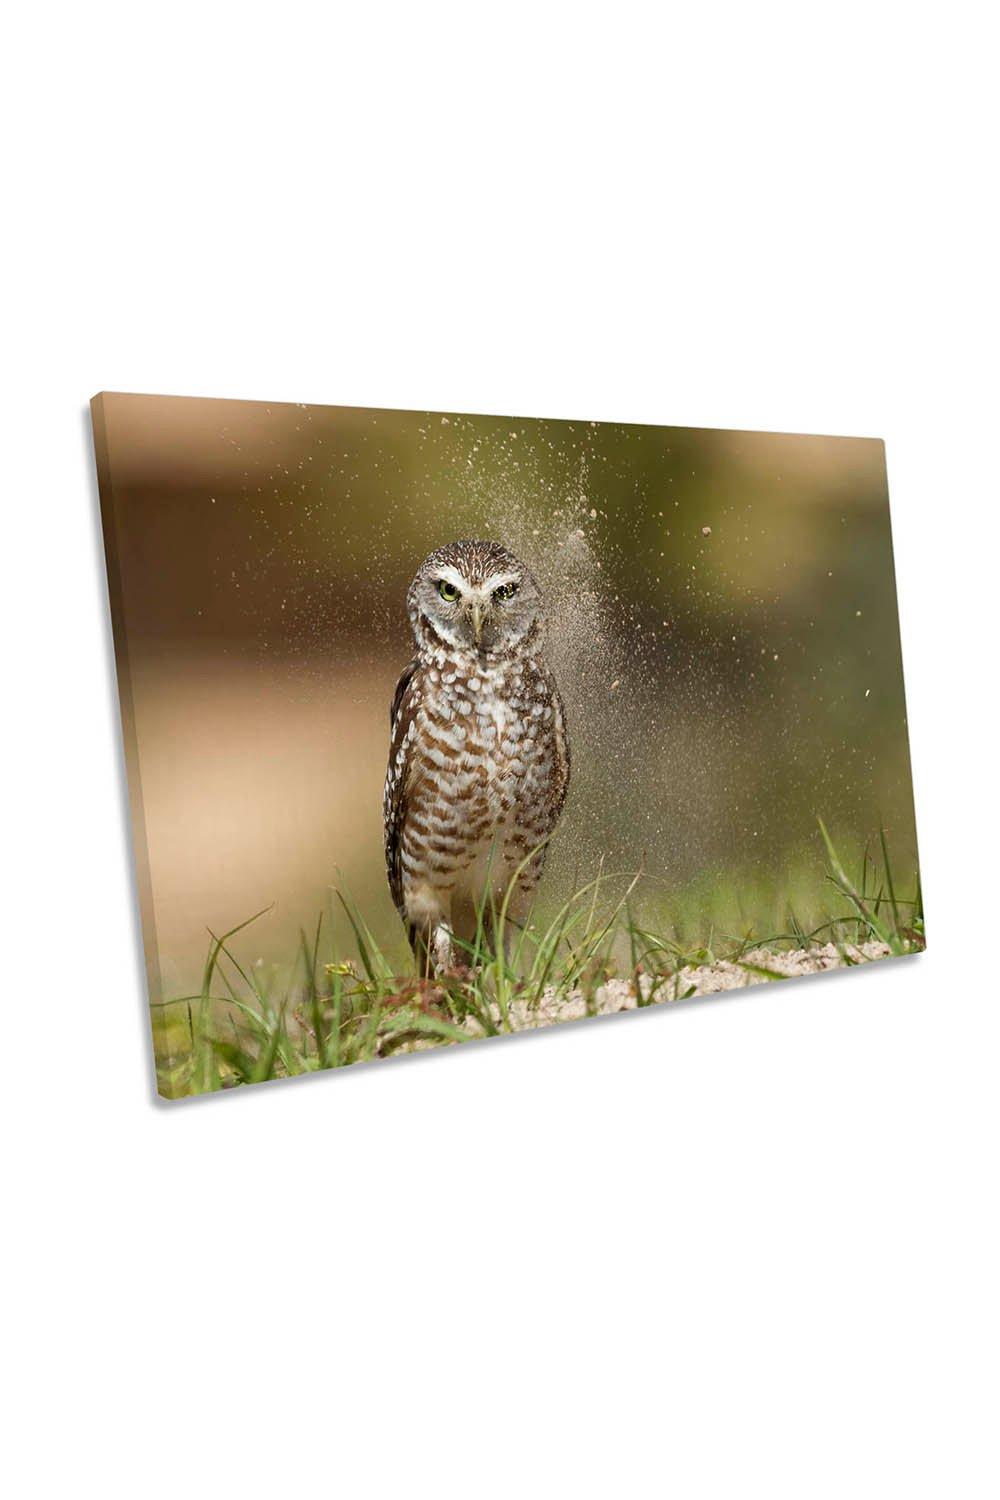 Last Light at the Nest Owl Wildlife Canvas Wall Art Picture Print